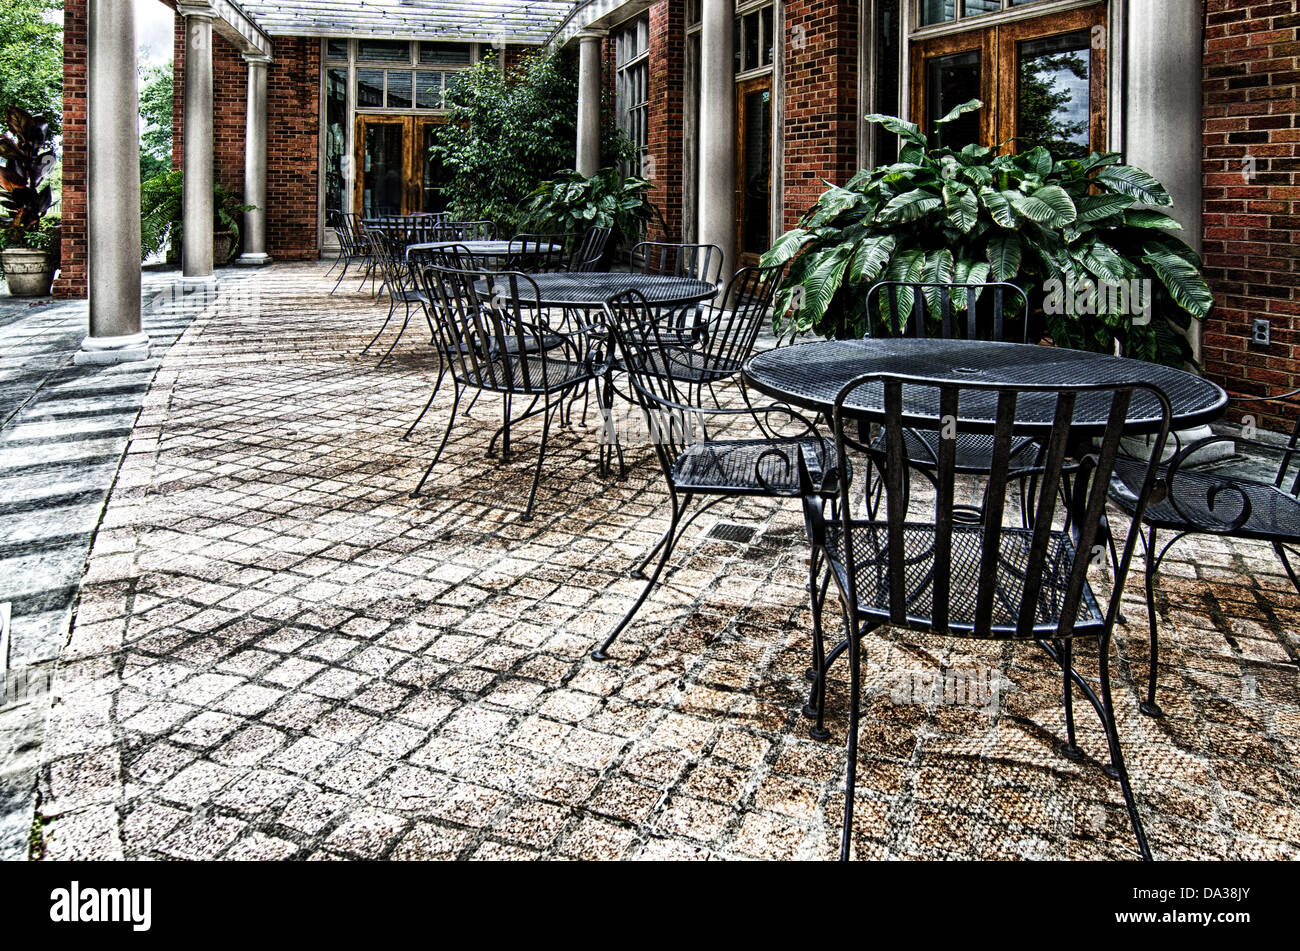 This image is a stone patio with wrought iron tables and chairs at the Alabama Shakespeare Festival in Montgomery, Alabama. Stock Photo